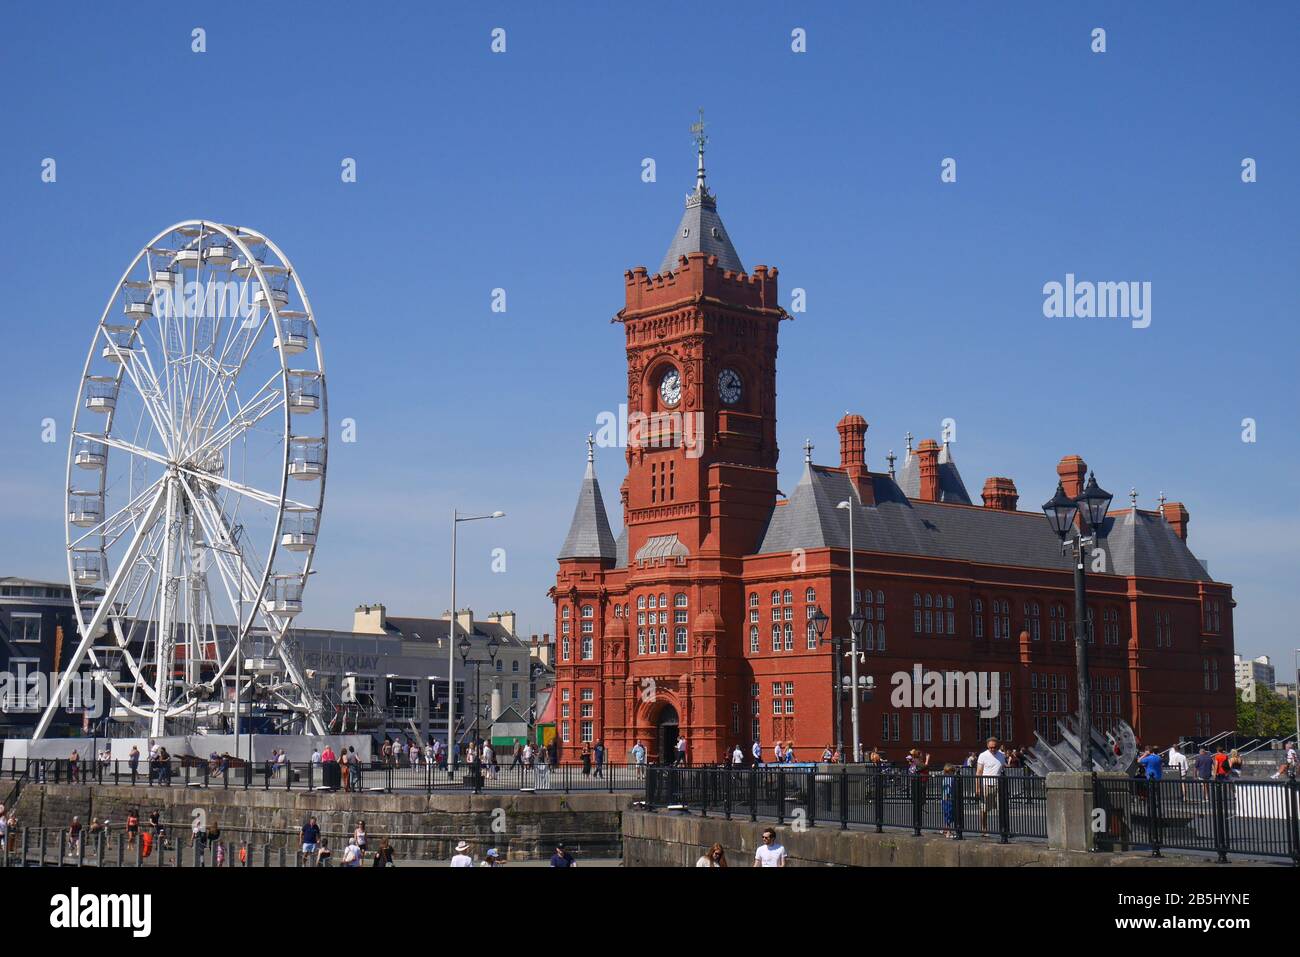 The Grade 1 listed Pierhead building of the National Assembly for Wales, designed by William Frame, and big wheel, Cardiff Bay, Cardiff, Wales, UK Stock Photo